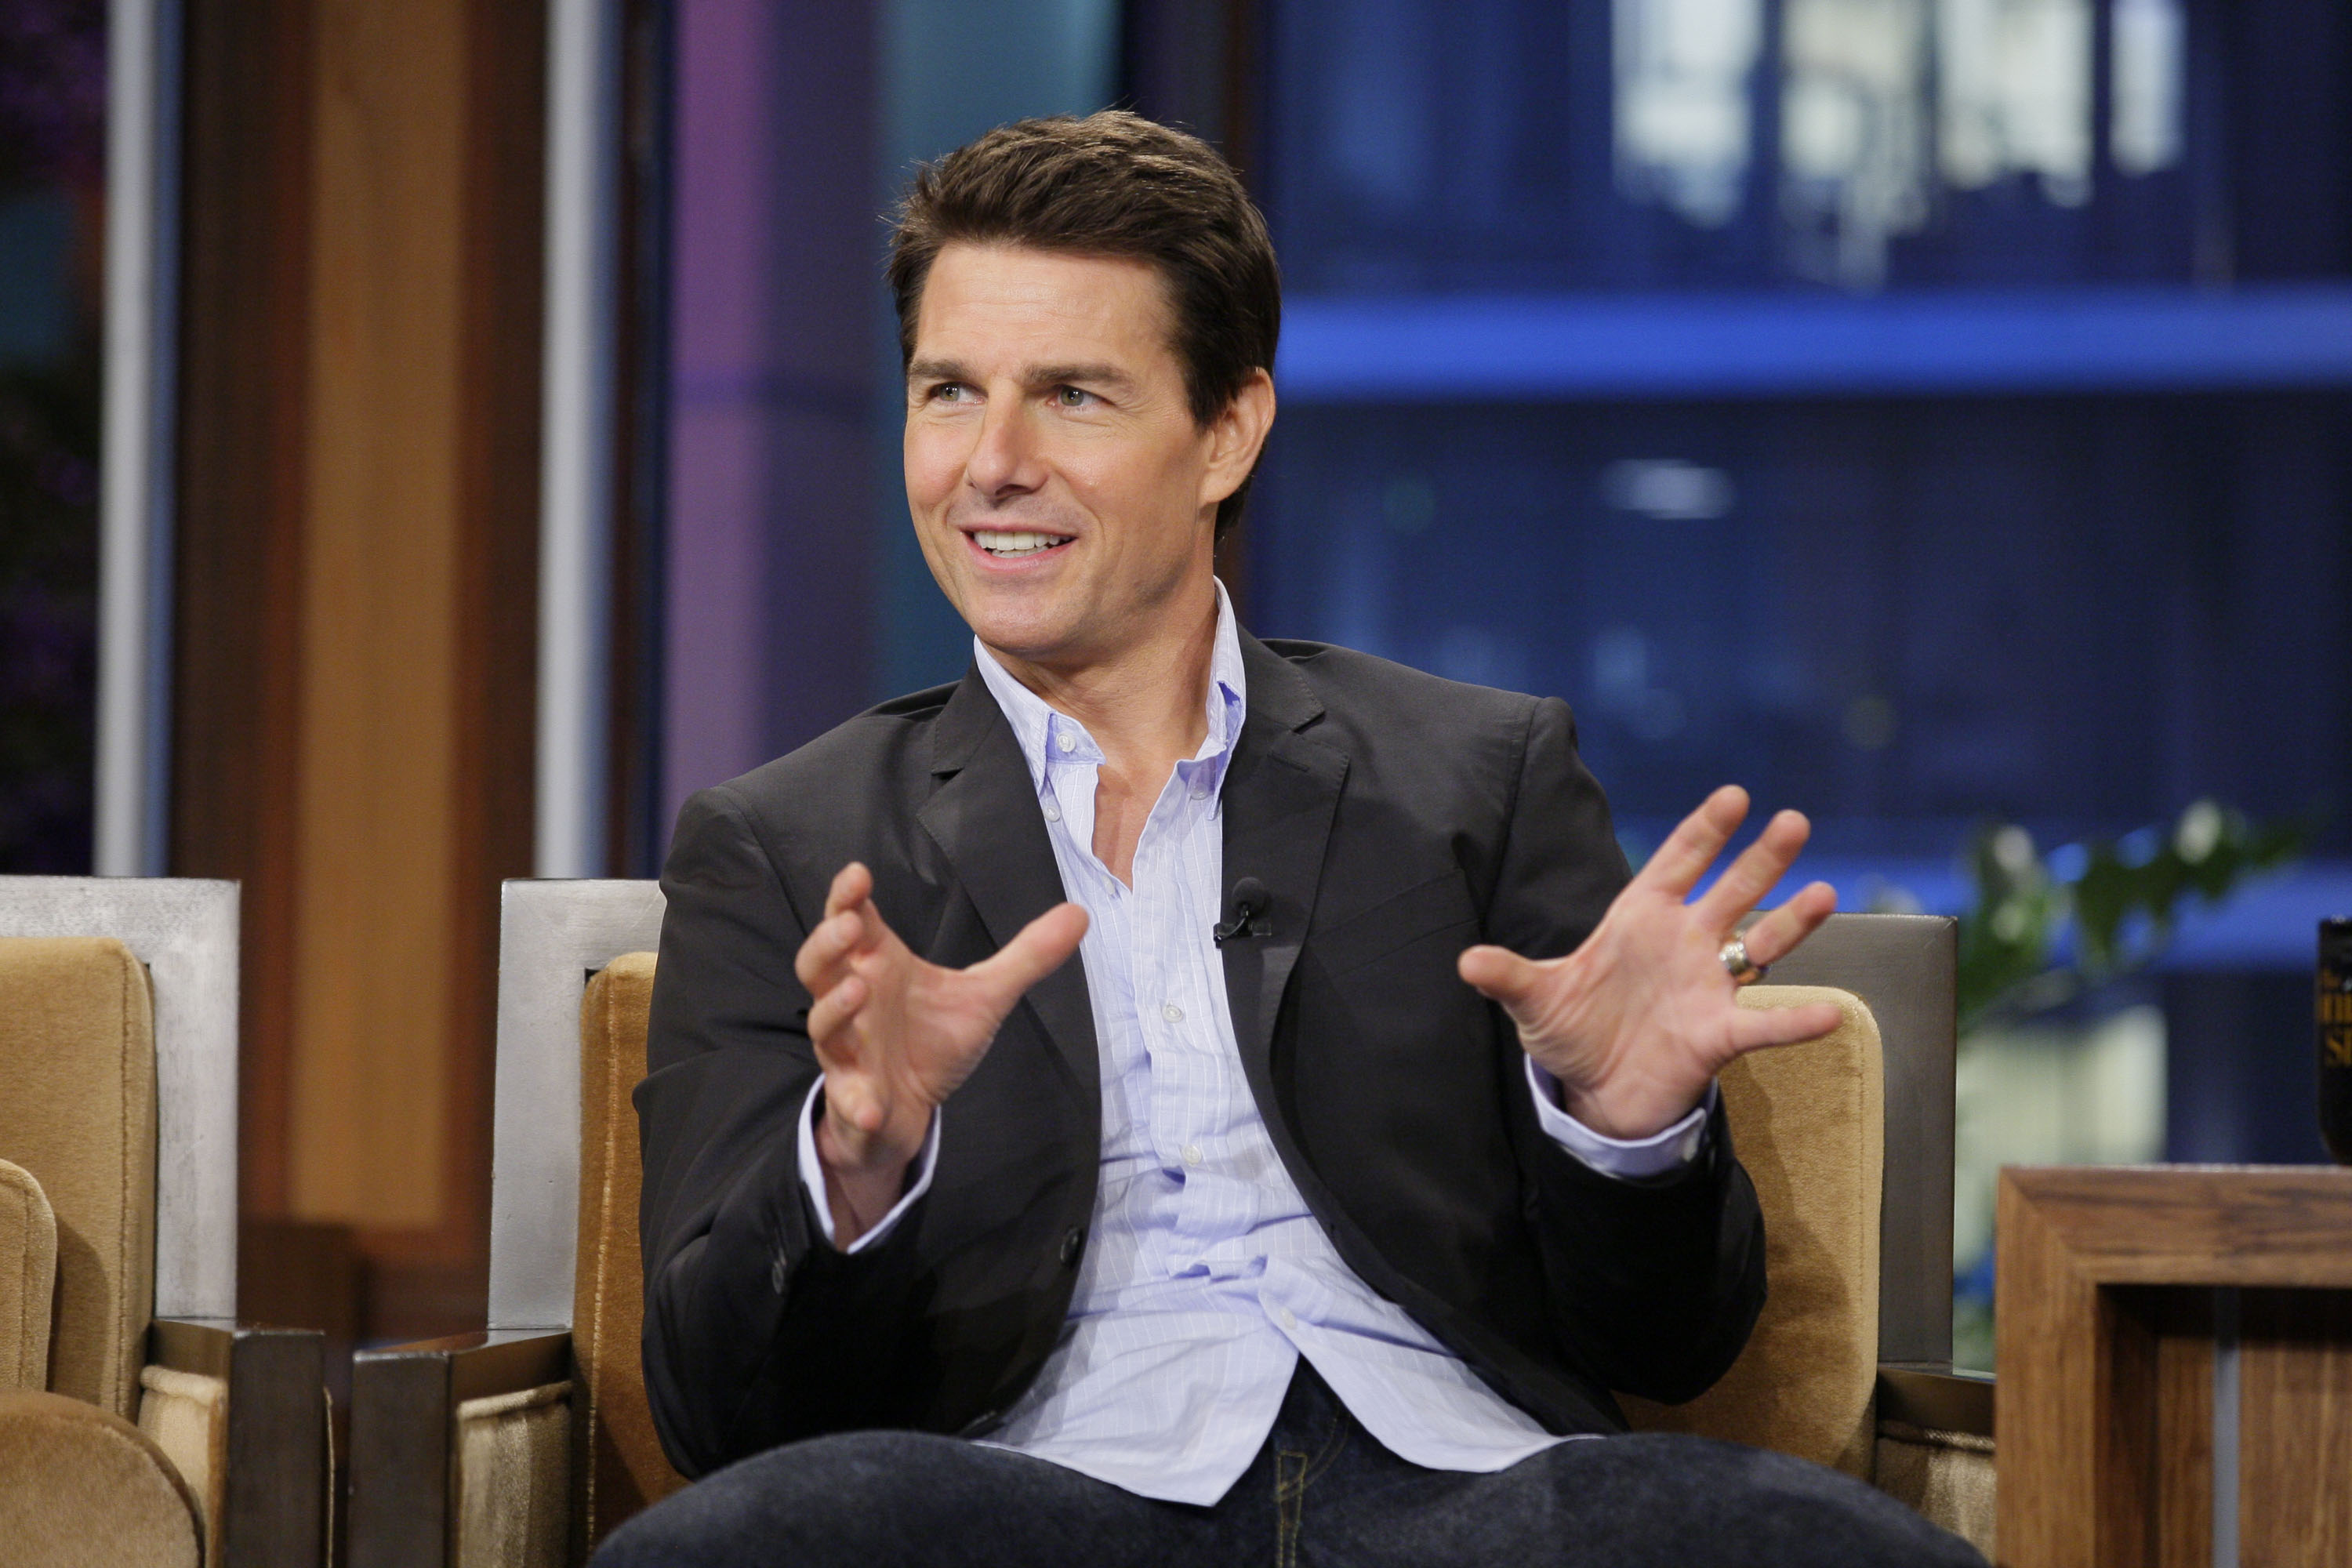 Tom Cruise during an interview on June 8, 2012 | Source: Getty Images